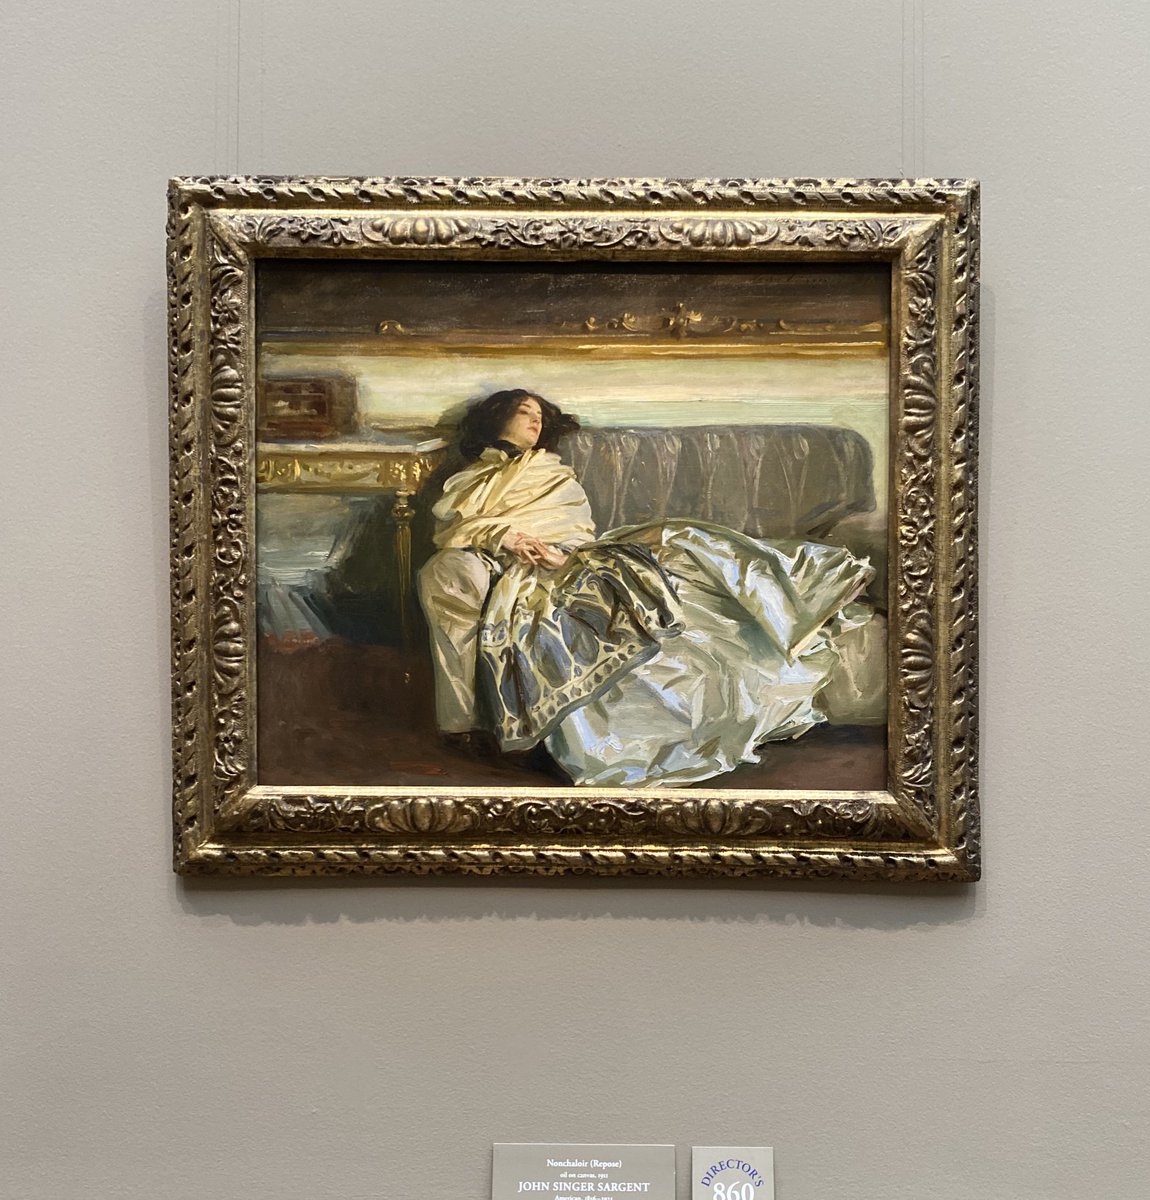 If you’d like to learn more about these works, dive into these free PDFs of two related publications:American Paintings of the Nineteenth Century:  http://go.usa.gov/xvbV4  Corcoran Gallery of Art: American Paintings to 1945:  http://go.usa.gov/xvbV2 